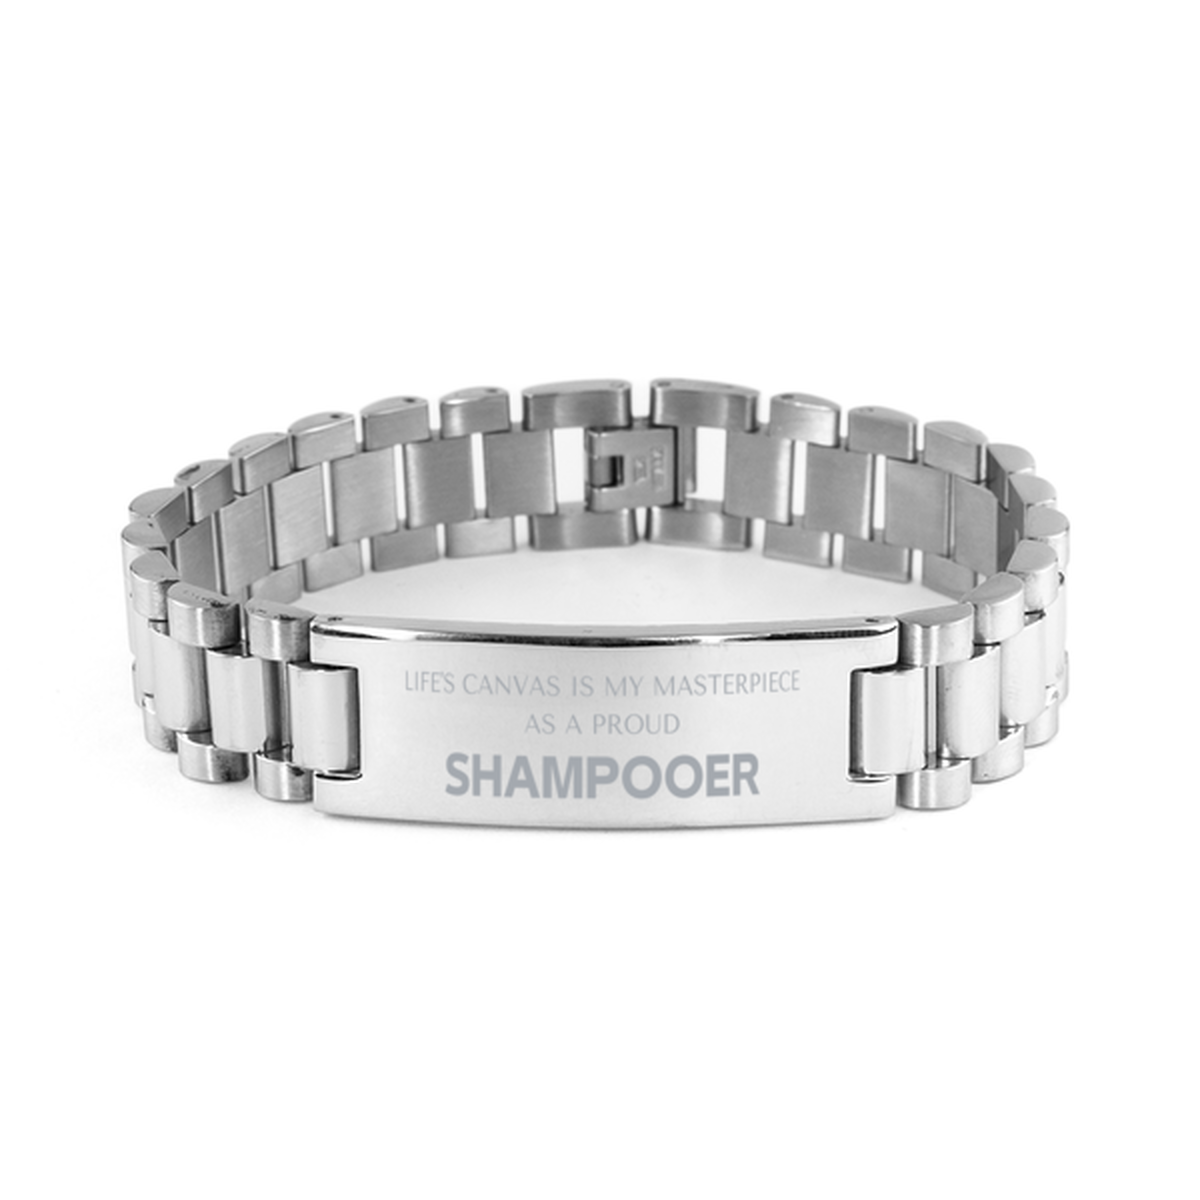 Proud Shampooer Gifts, Life's canvas is my masterpiece, Epic Birthday Christmas Unique Ladder Stainless Steel Bracelet For Shampooer, Coworkers, Men, Women, Friends